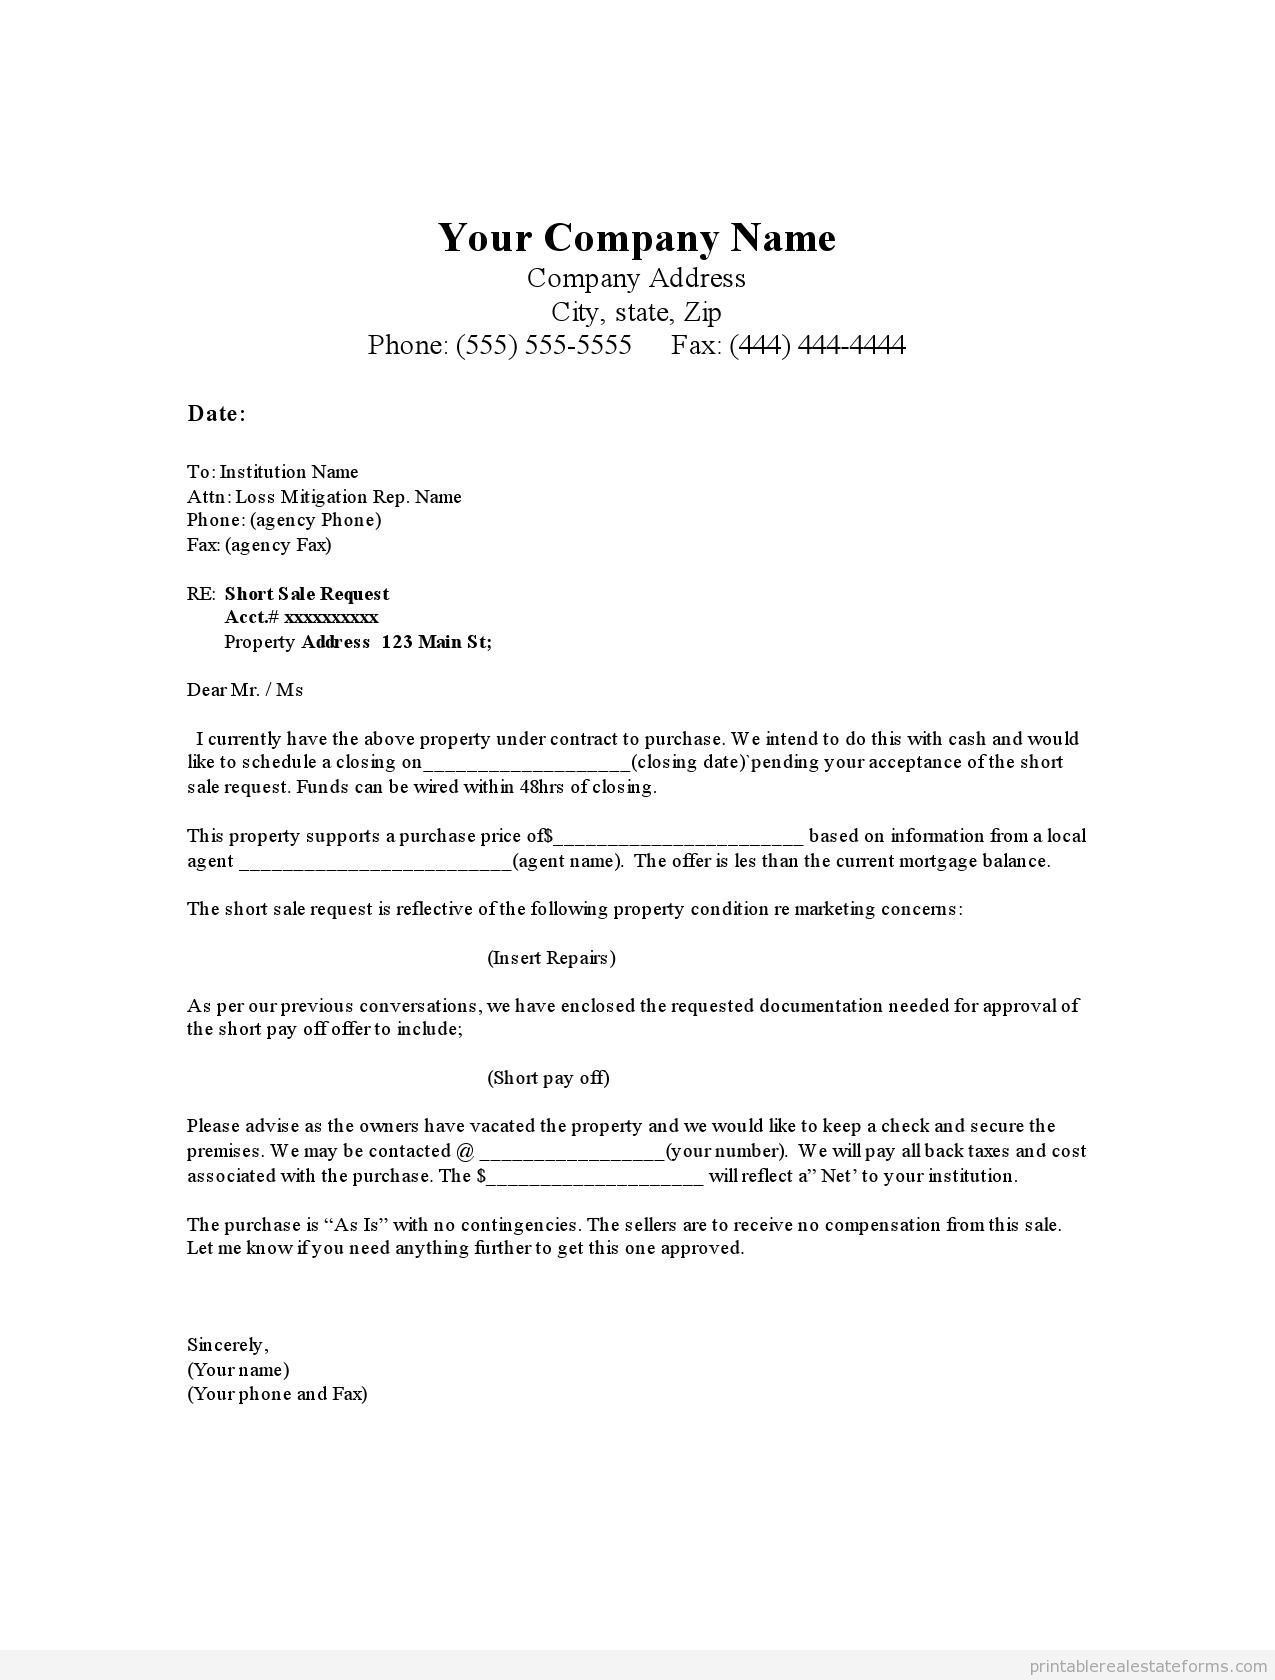 Free foreclosure Letter Template - Intent to foreclose Letter Sample Ideas Rescission 7911024